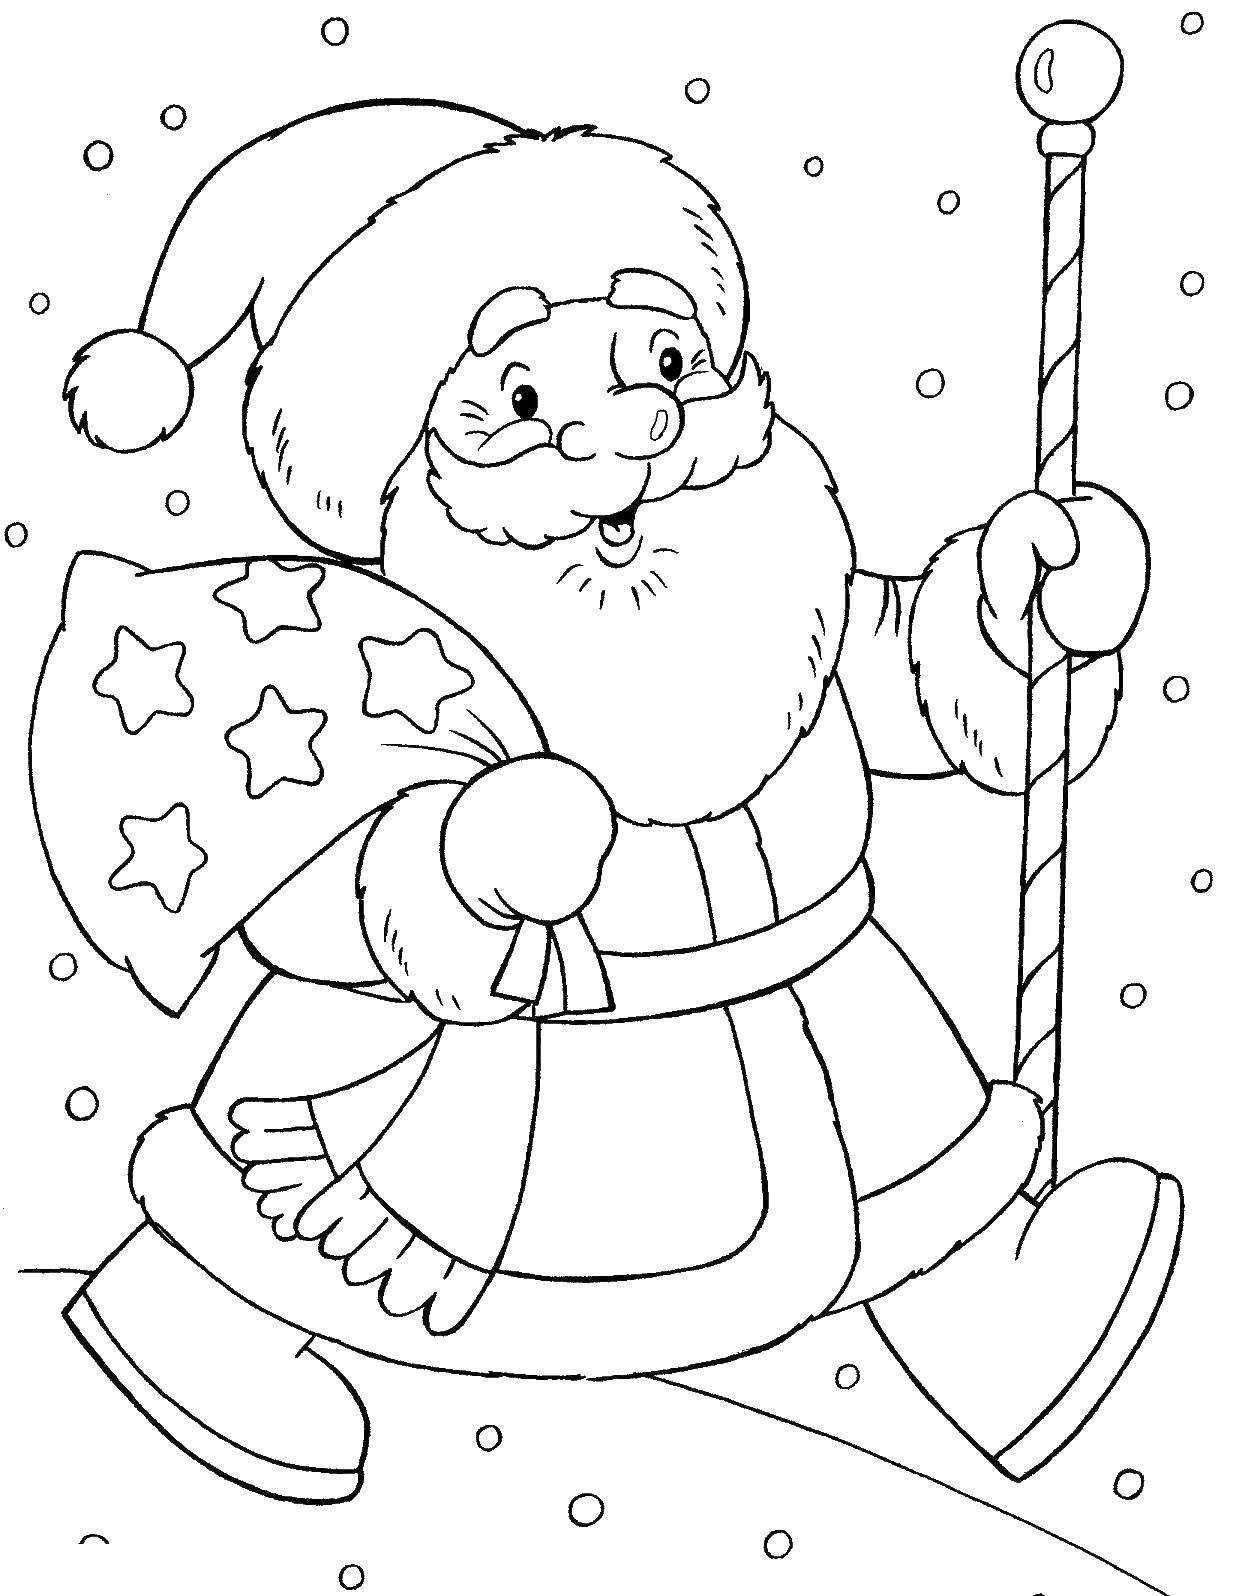 Coloring Santa Claus with gifts. Category new year. Tags:  New Year, Santa Claus.